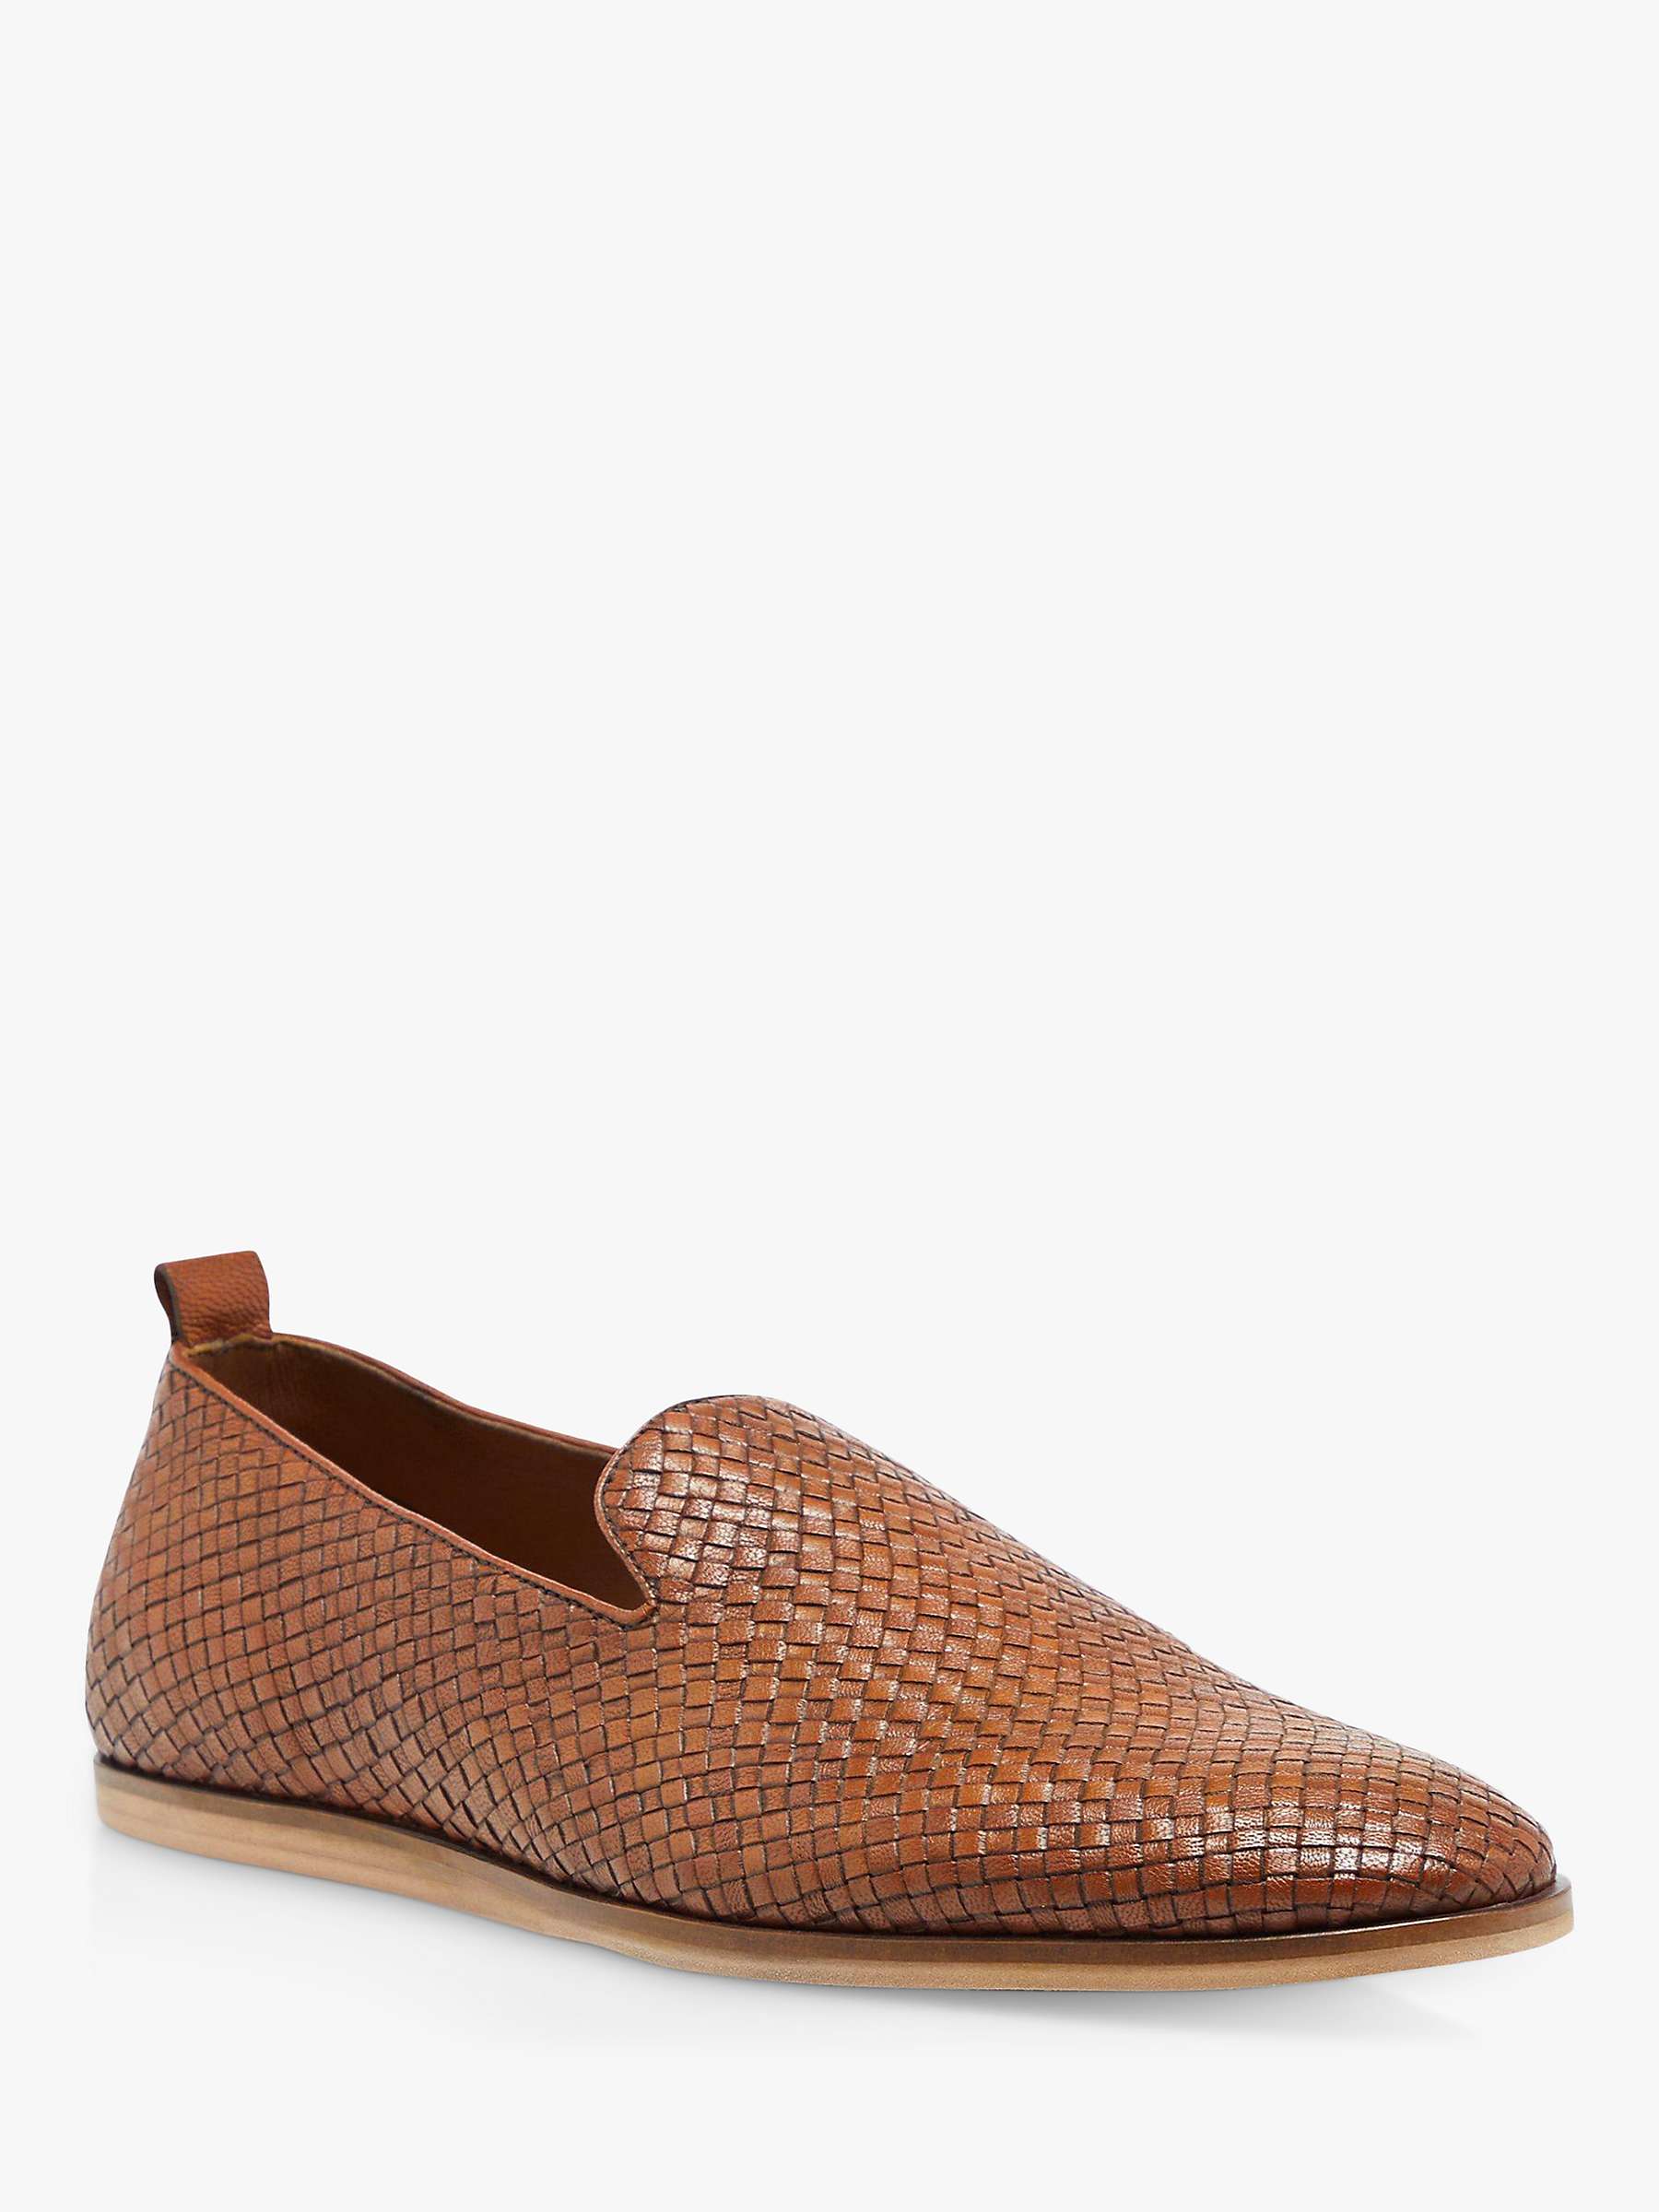 Buy Dune Bases Woven Leather Loafers, Brown Online at johnlewis.com